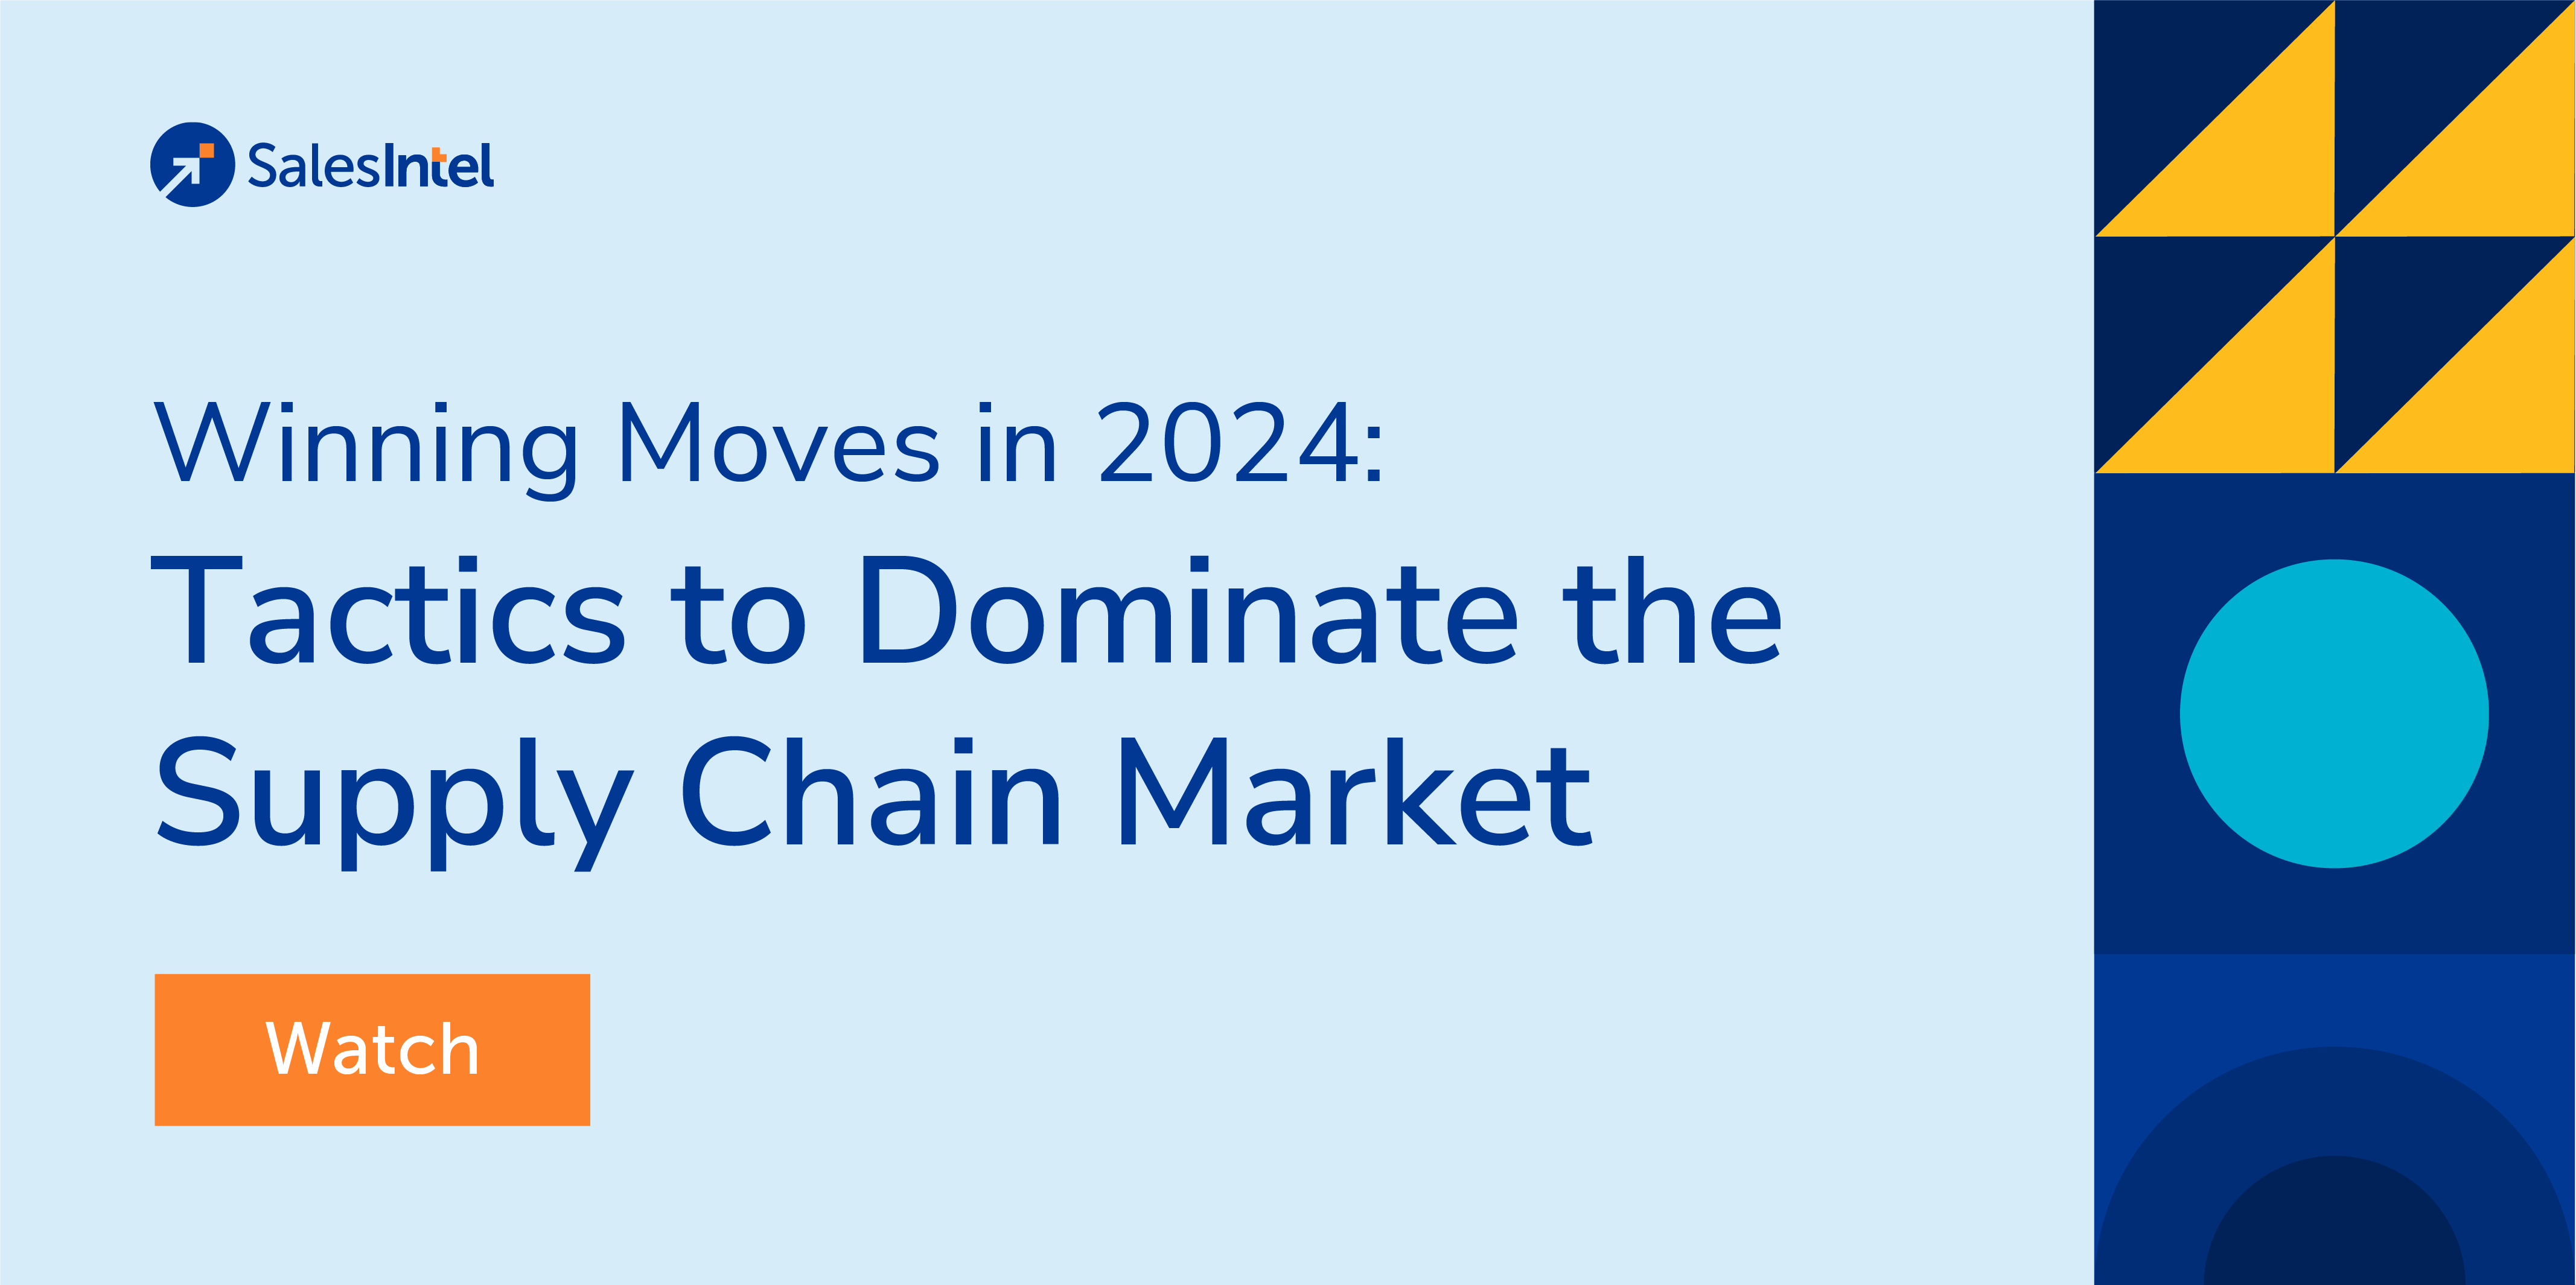 Making_Moves_in_2024-_Winning_Tactics_to_Dominate_the_Supply_Chain_Market